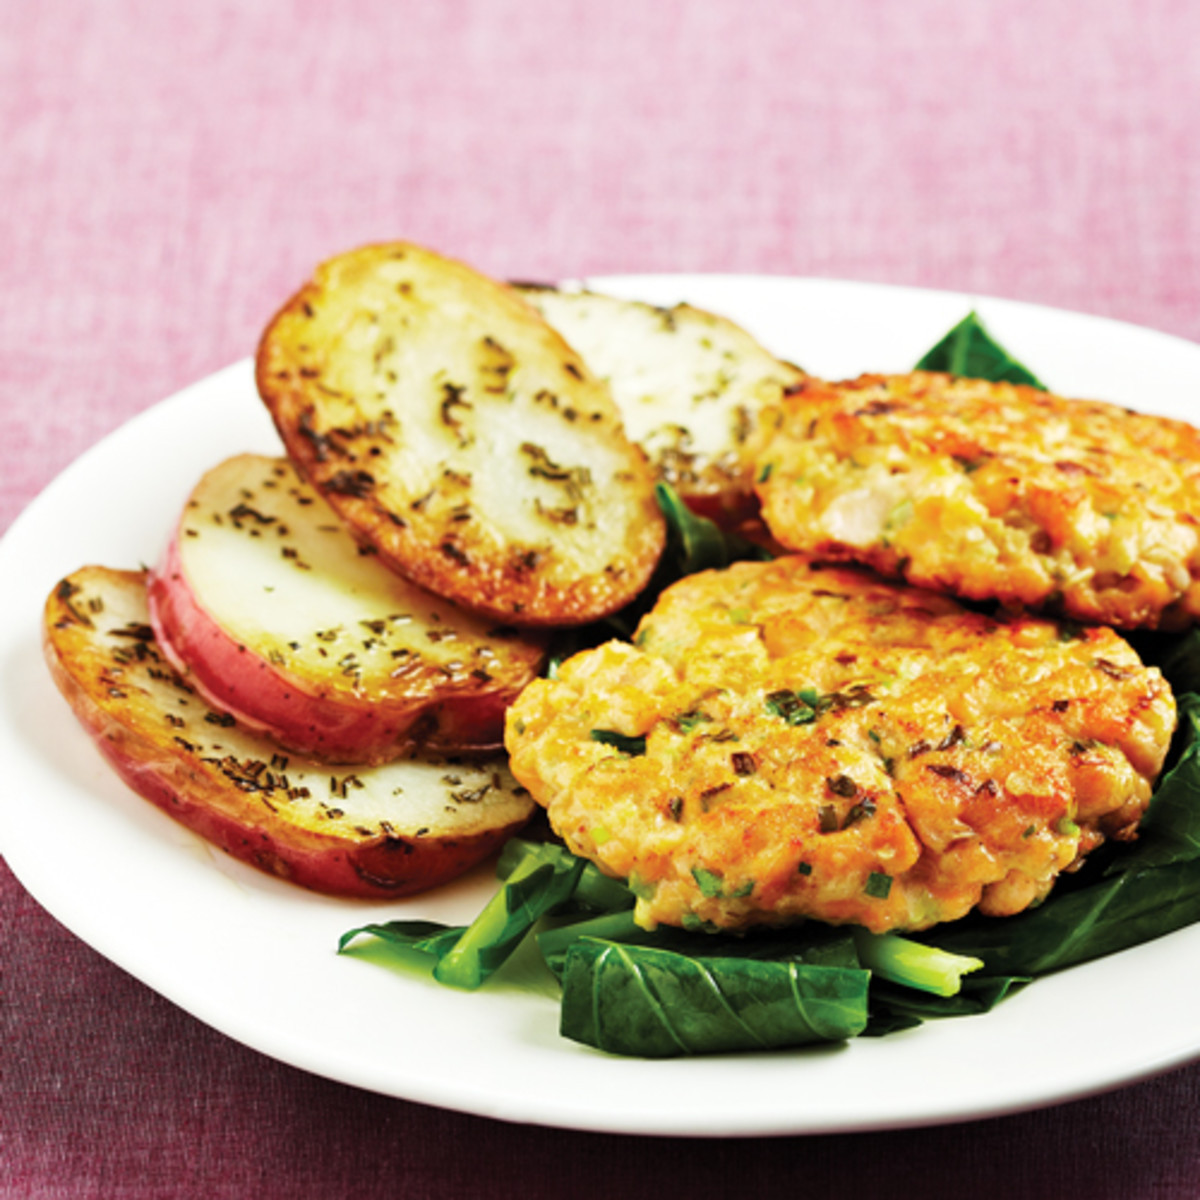 Salmon Patties With Oatmeal
 Salmon Oat Cakes with Rosemary Potatoes & Greens Clean